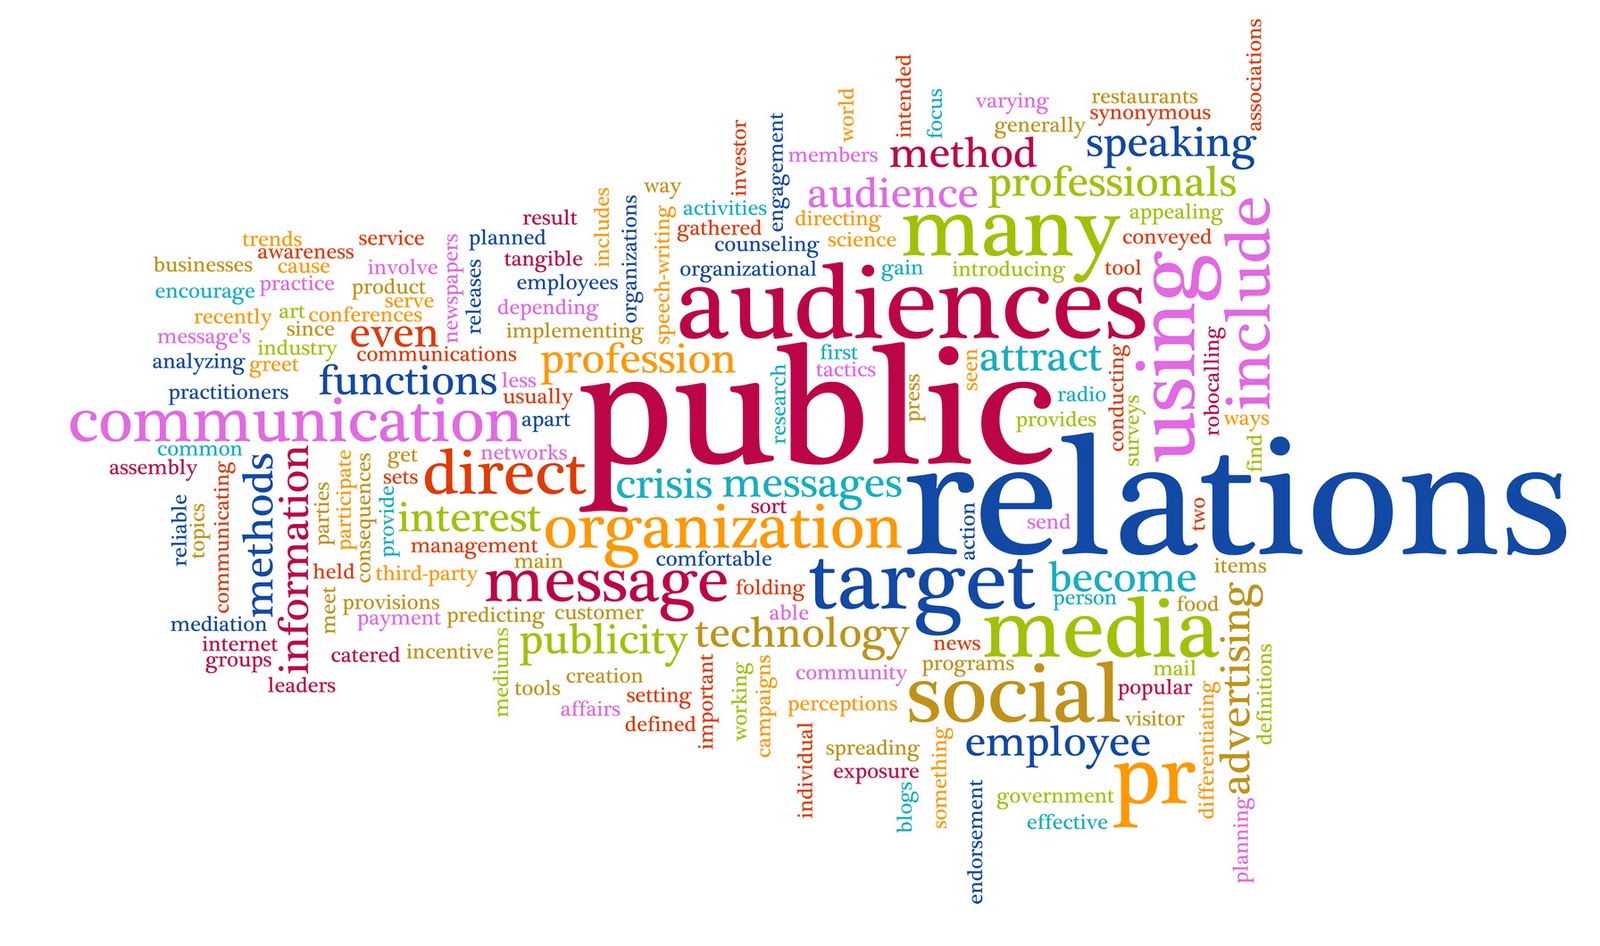 Word cloud highlighting the significance of public relations (PR) for small businesses.